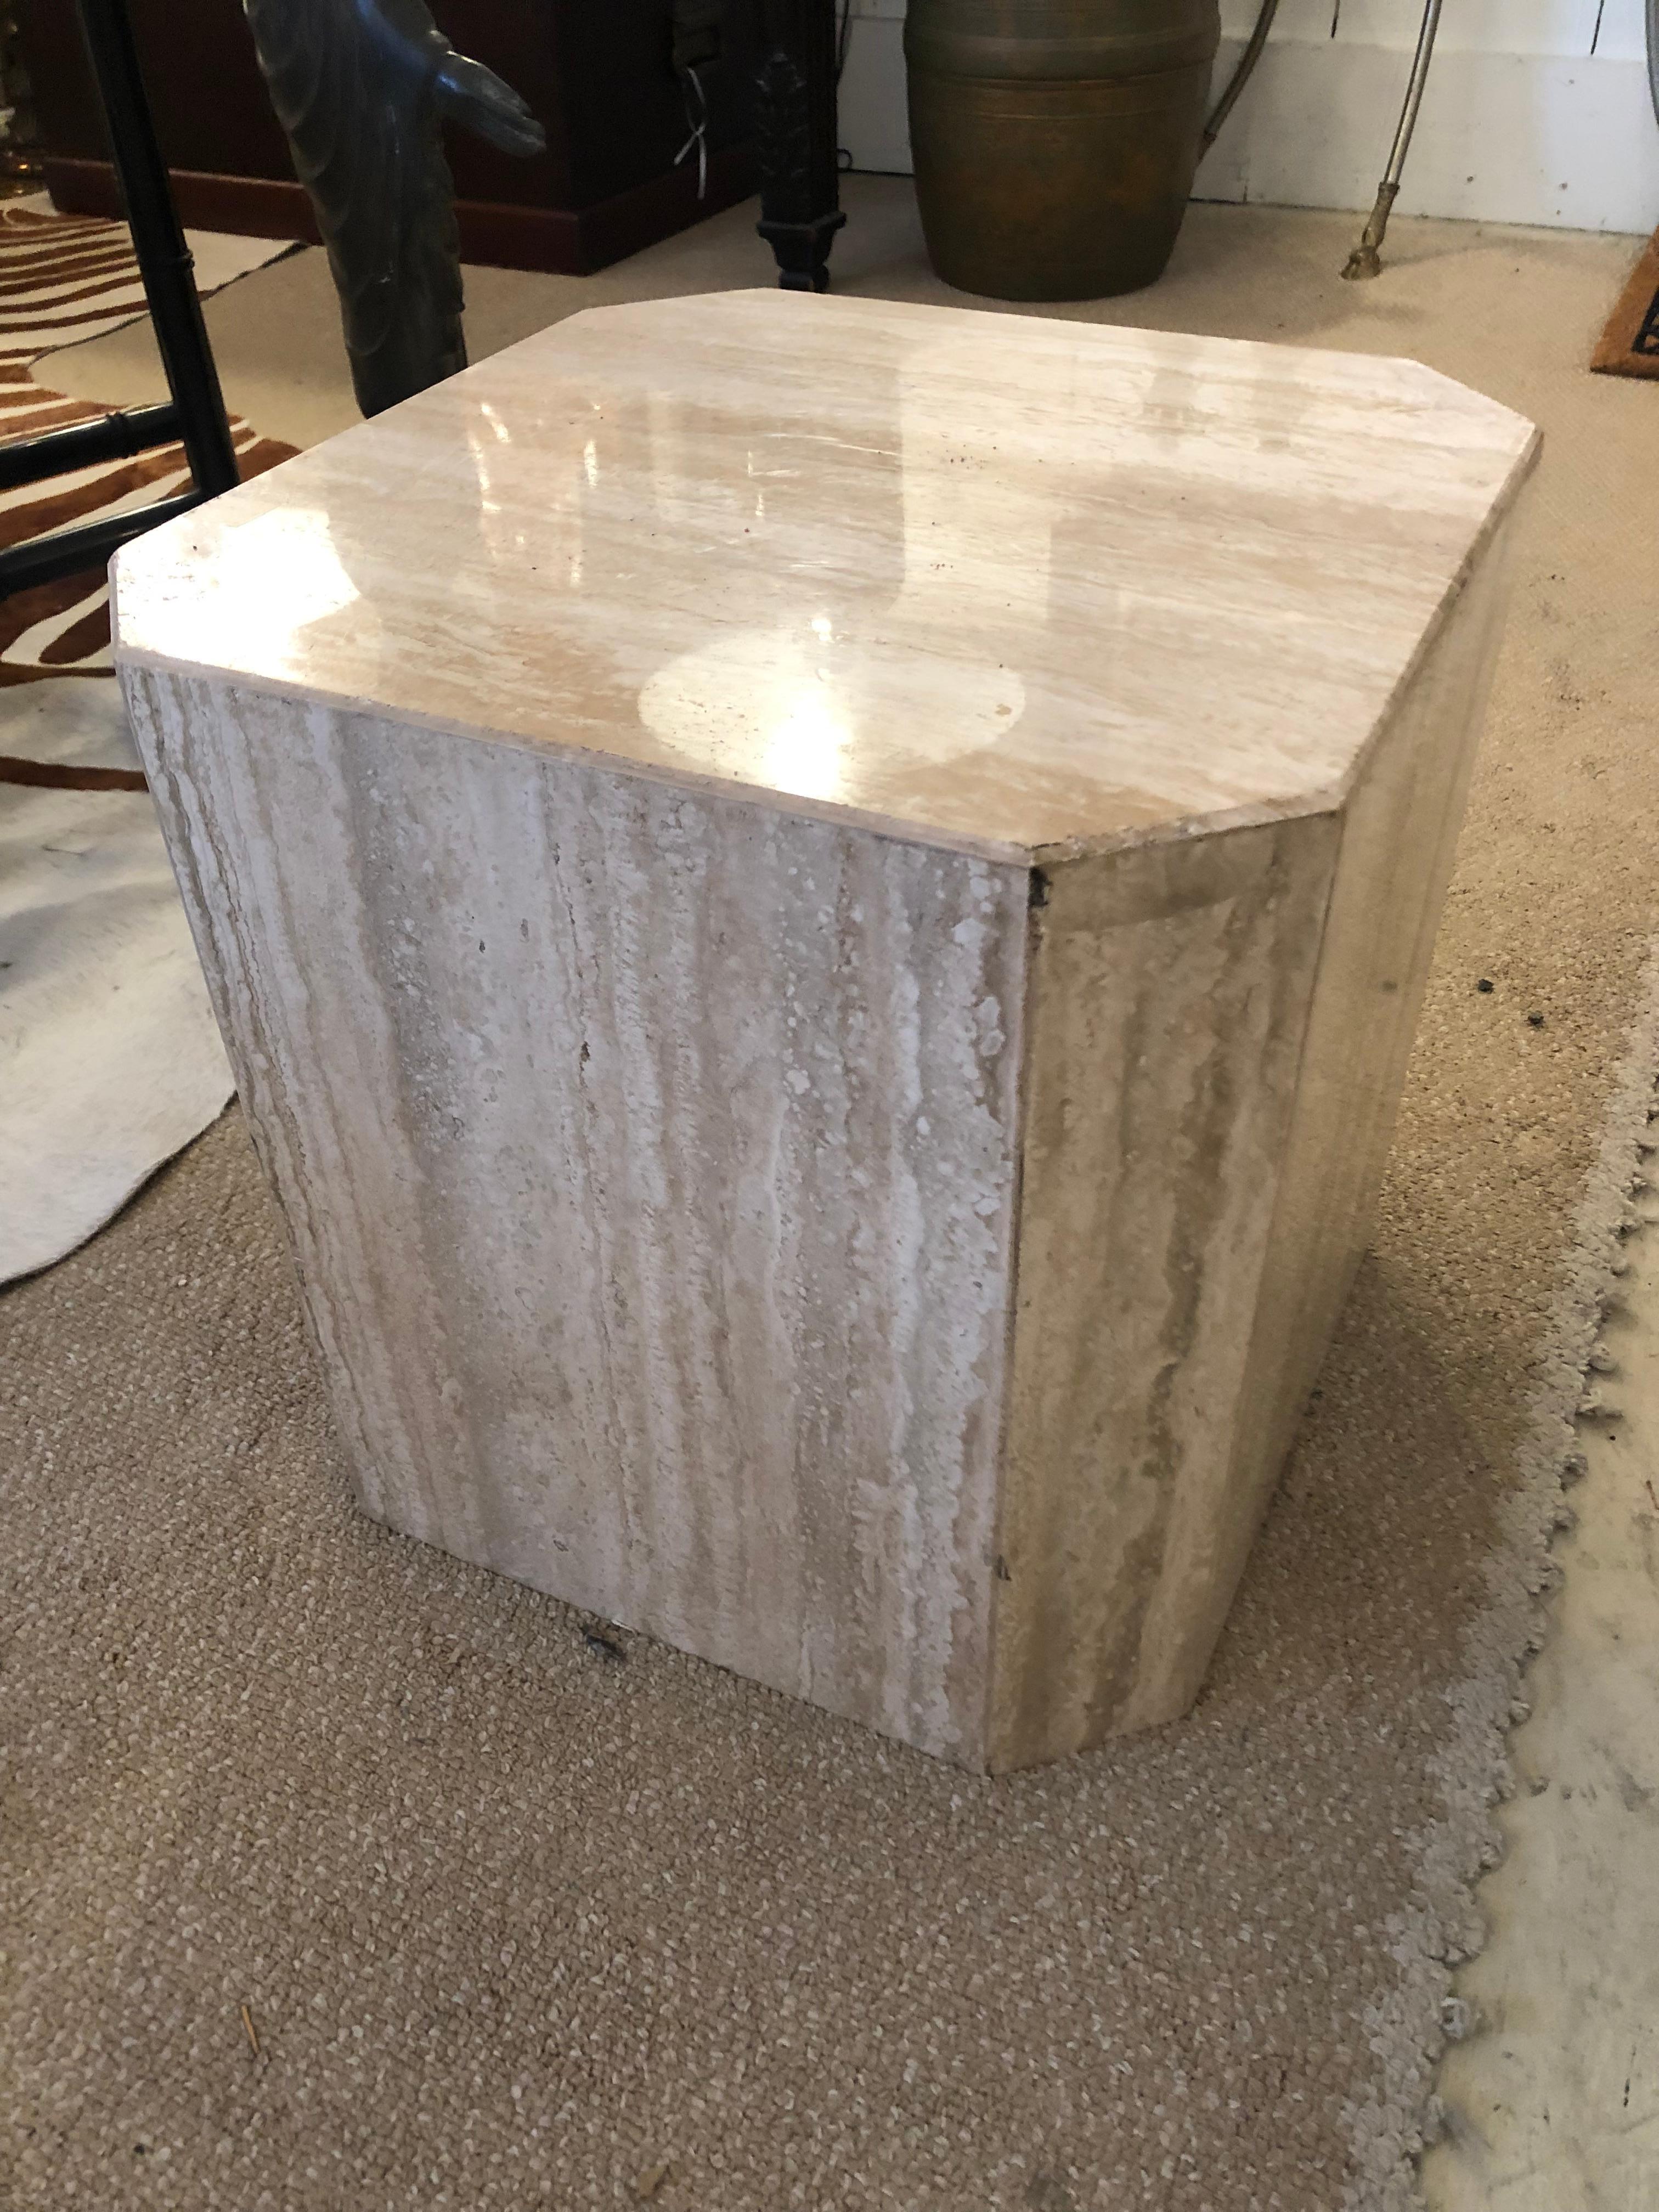 Sleek but chunky cube of travertine with squared off corners makes a glamorous little drinks table.